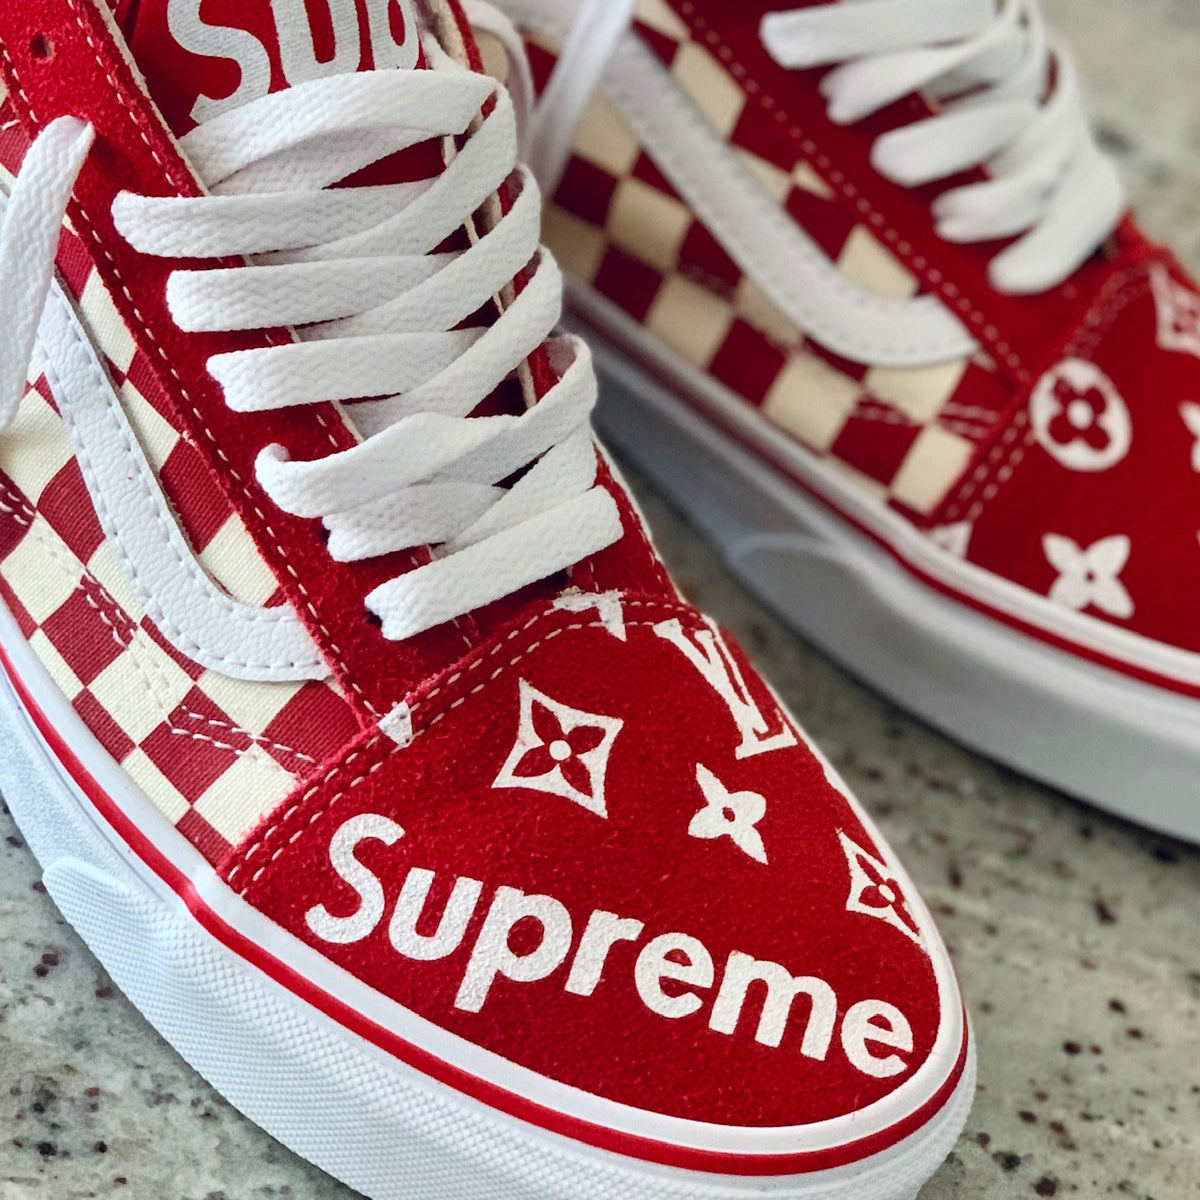 LV Vans (shoes included)